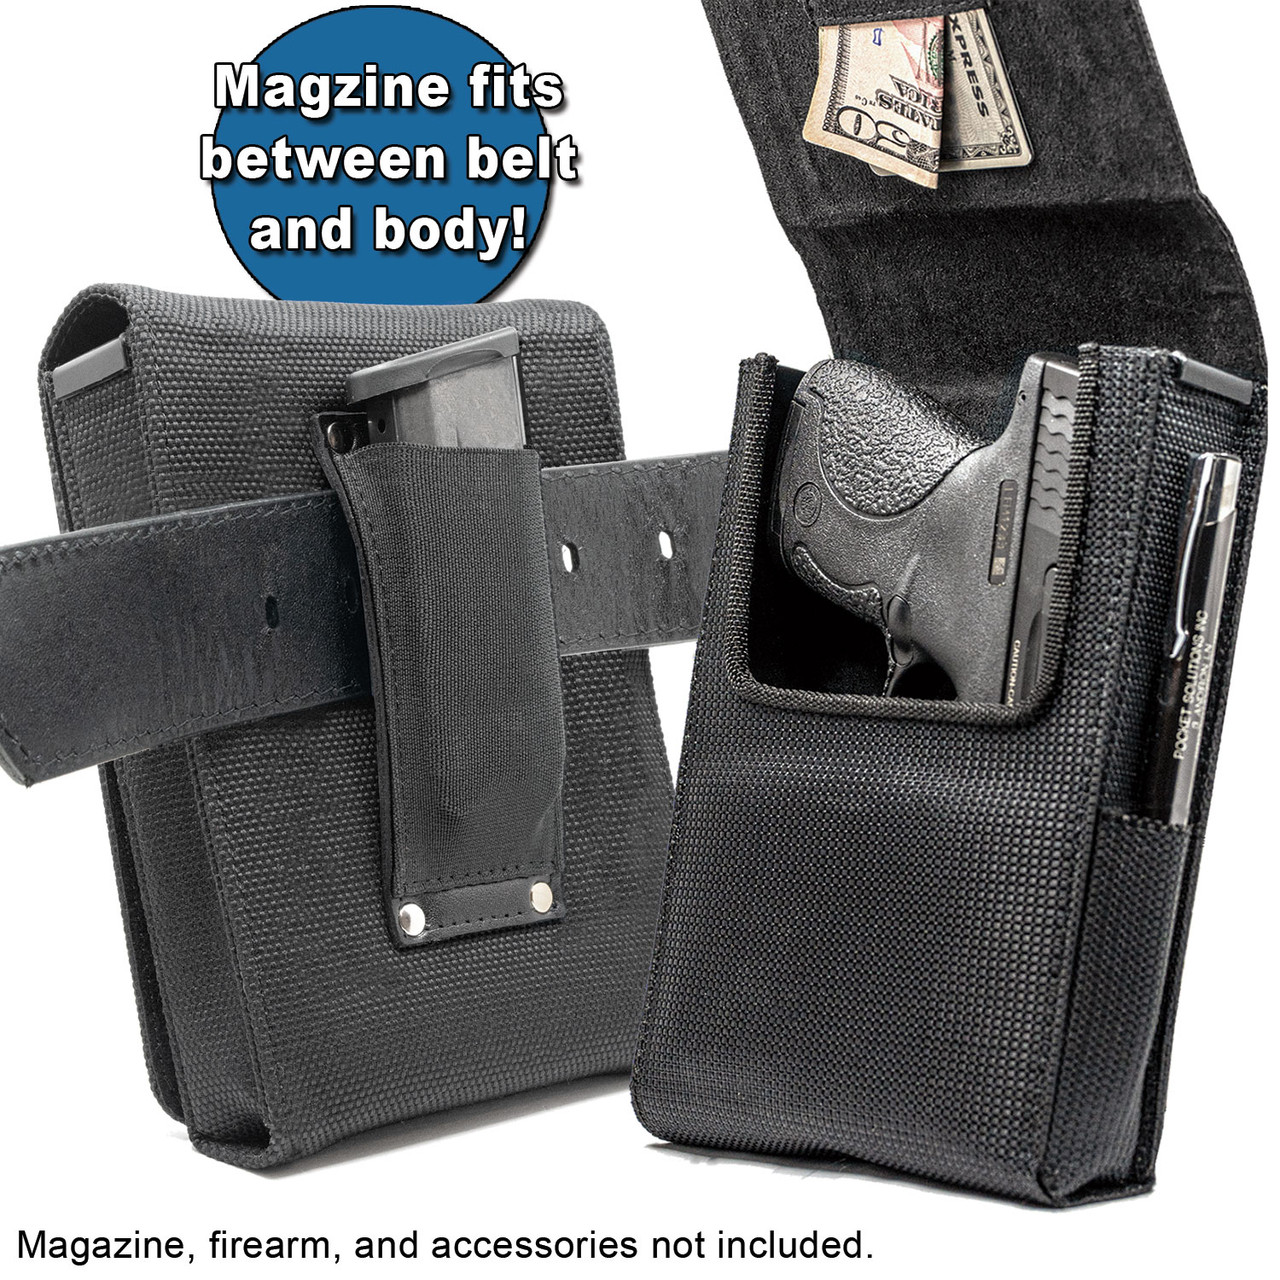 The Taurus .38 Special Max Defense Holster